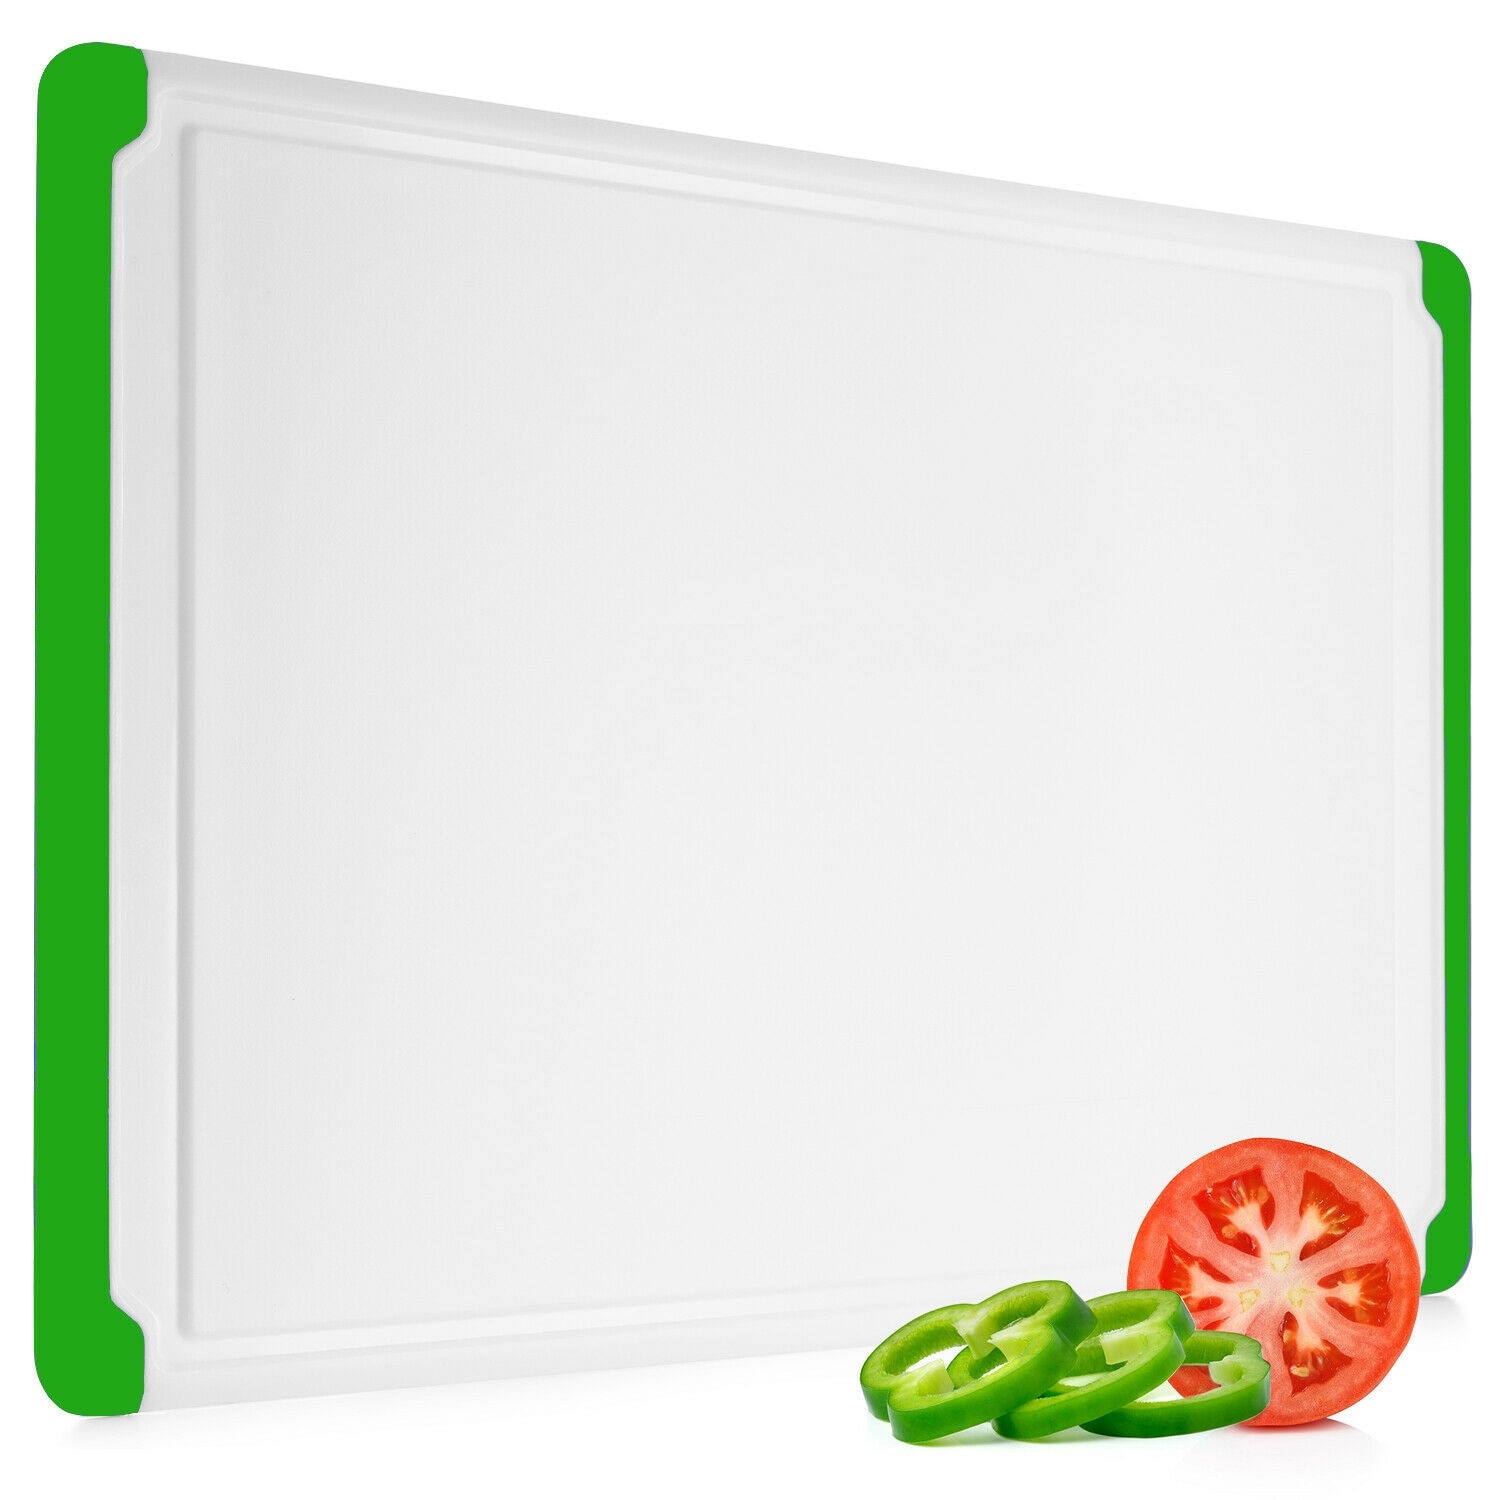 https://ak1.ostkcdn.com/images/products/is/images/direct/2f50a195ceaba4f43de52b959f80894a32bf2930/Belwares-Large-Plastic-Cutting-Board-With-Drip-Grooves.jpg